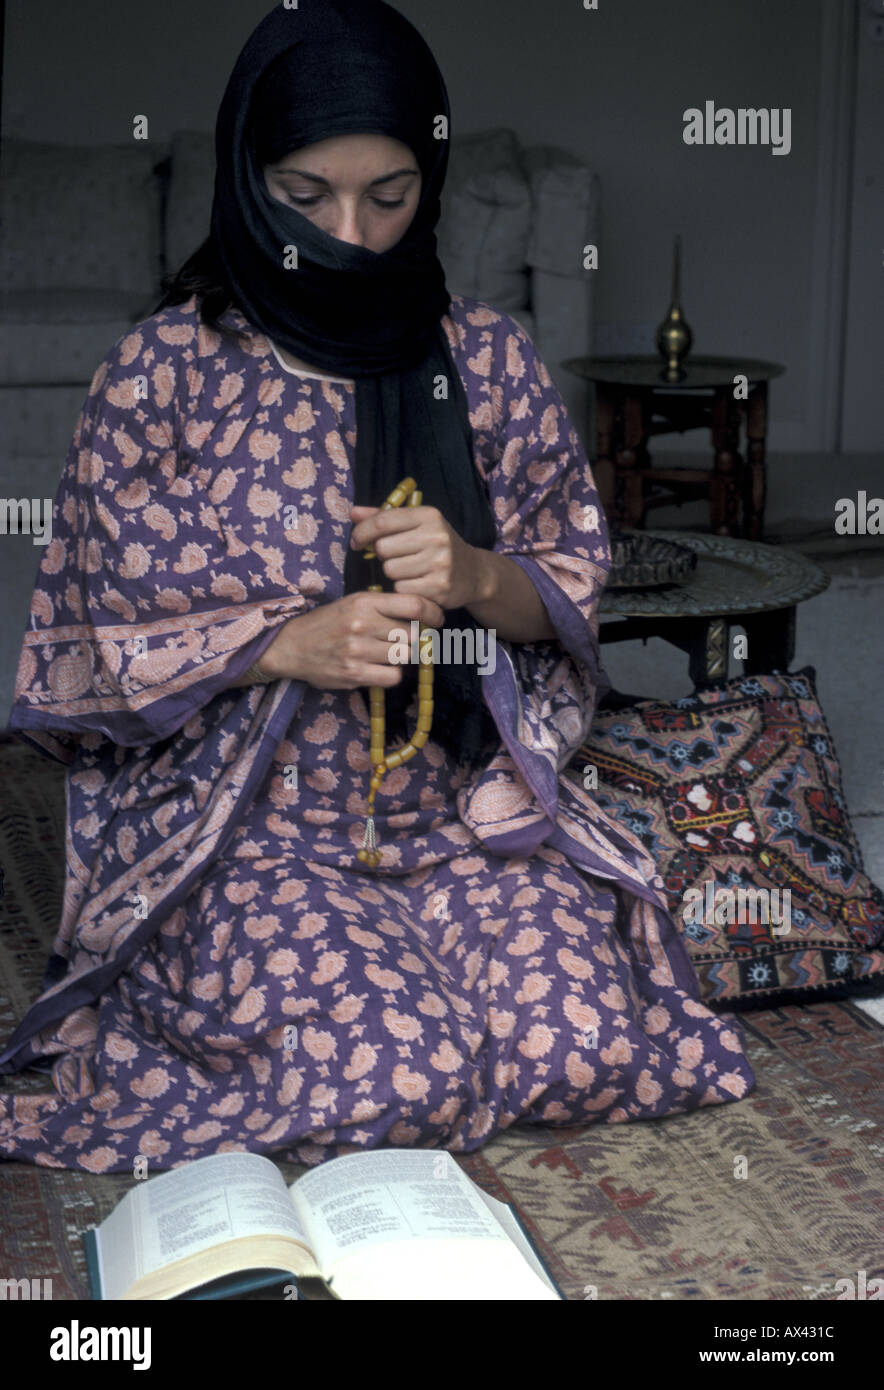 A Shi'ite woman reading the Qur'an and holding prayer beads Stock Photo